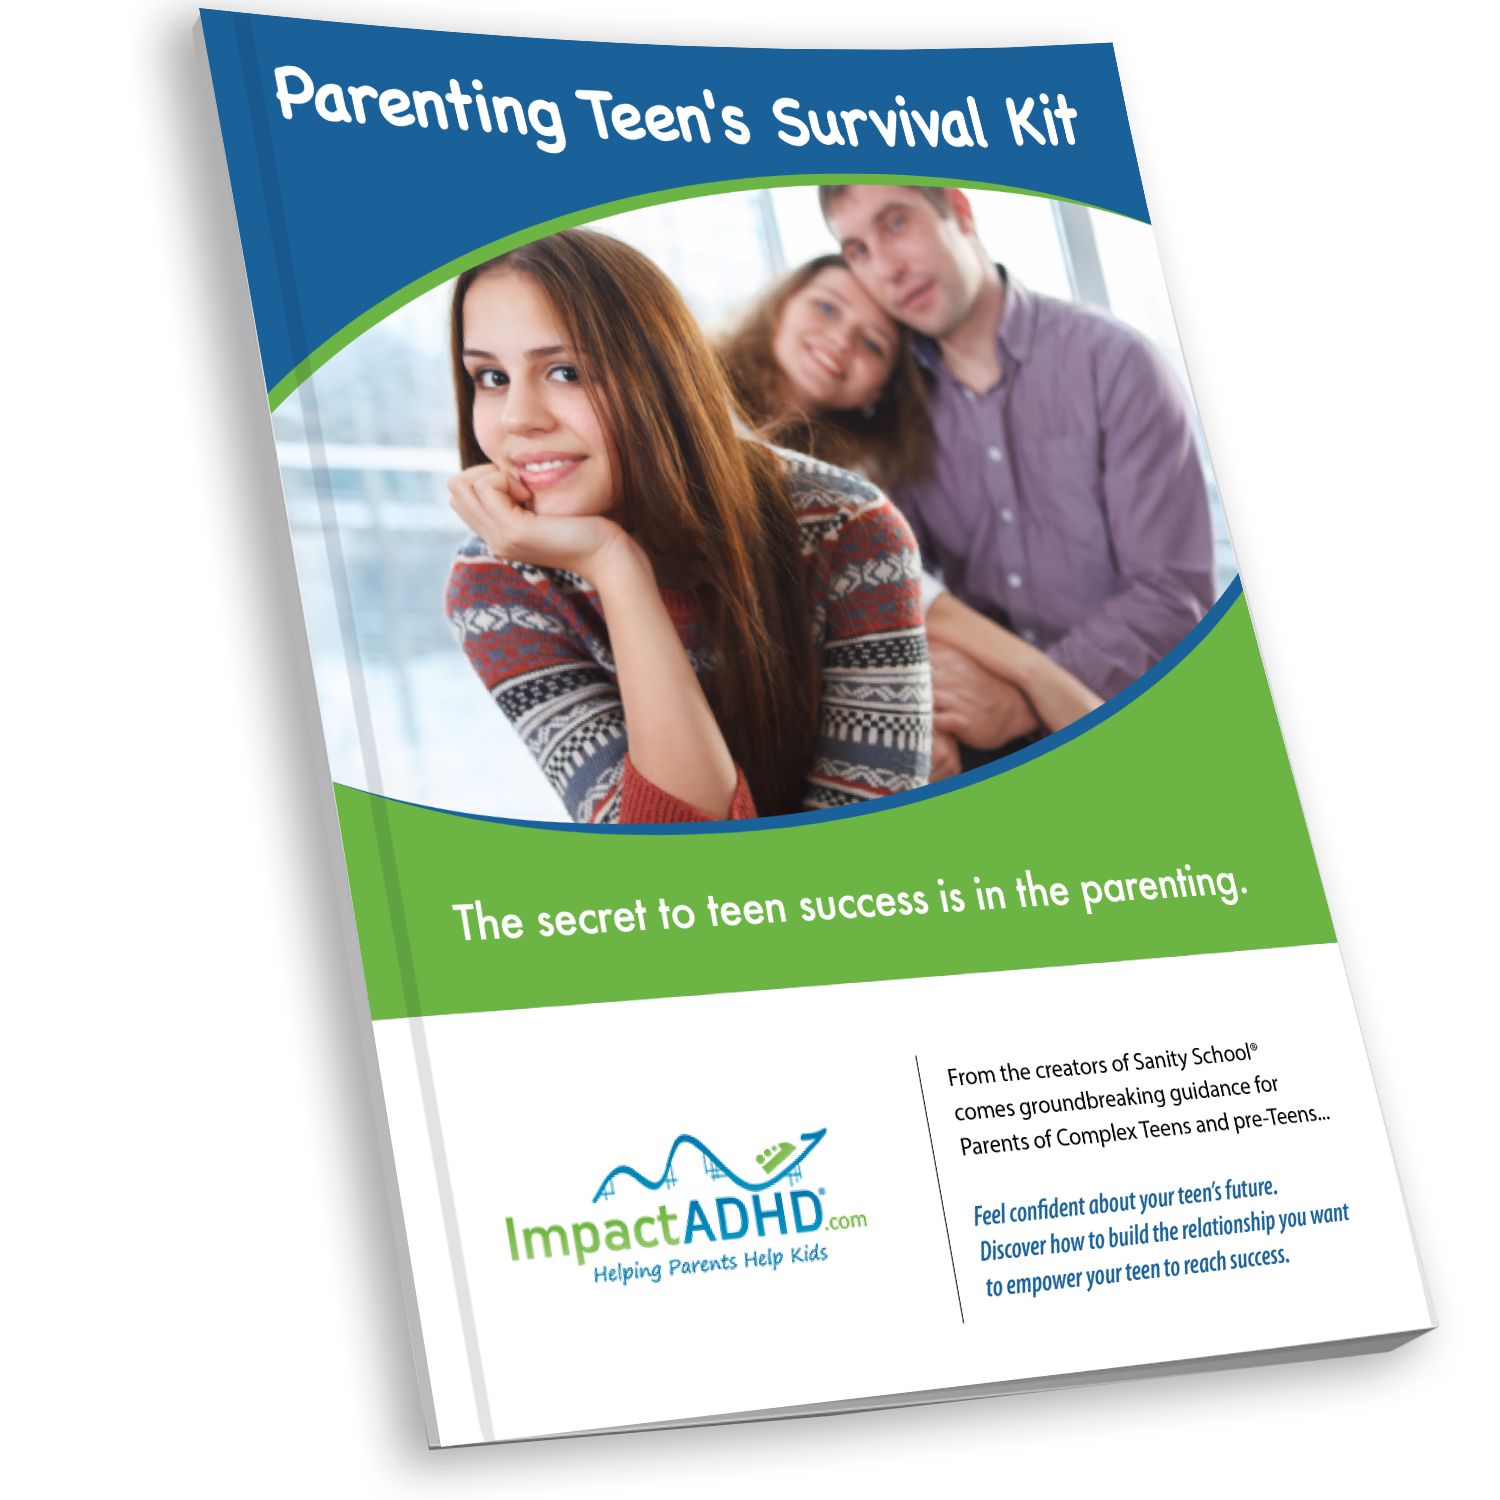 ImpactADHD© Store: Parenting with Impact: Teen Survival Kit